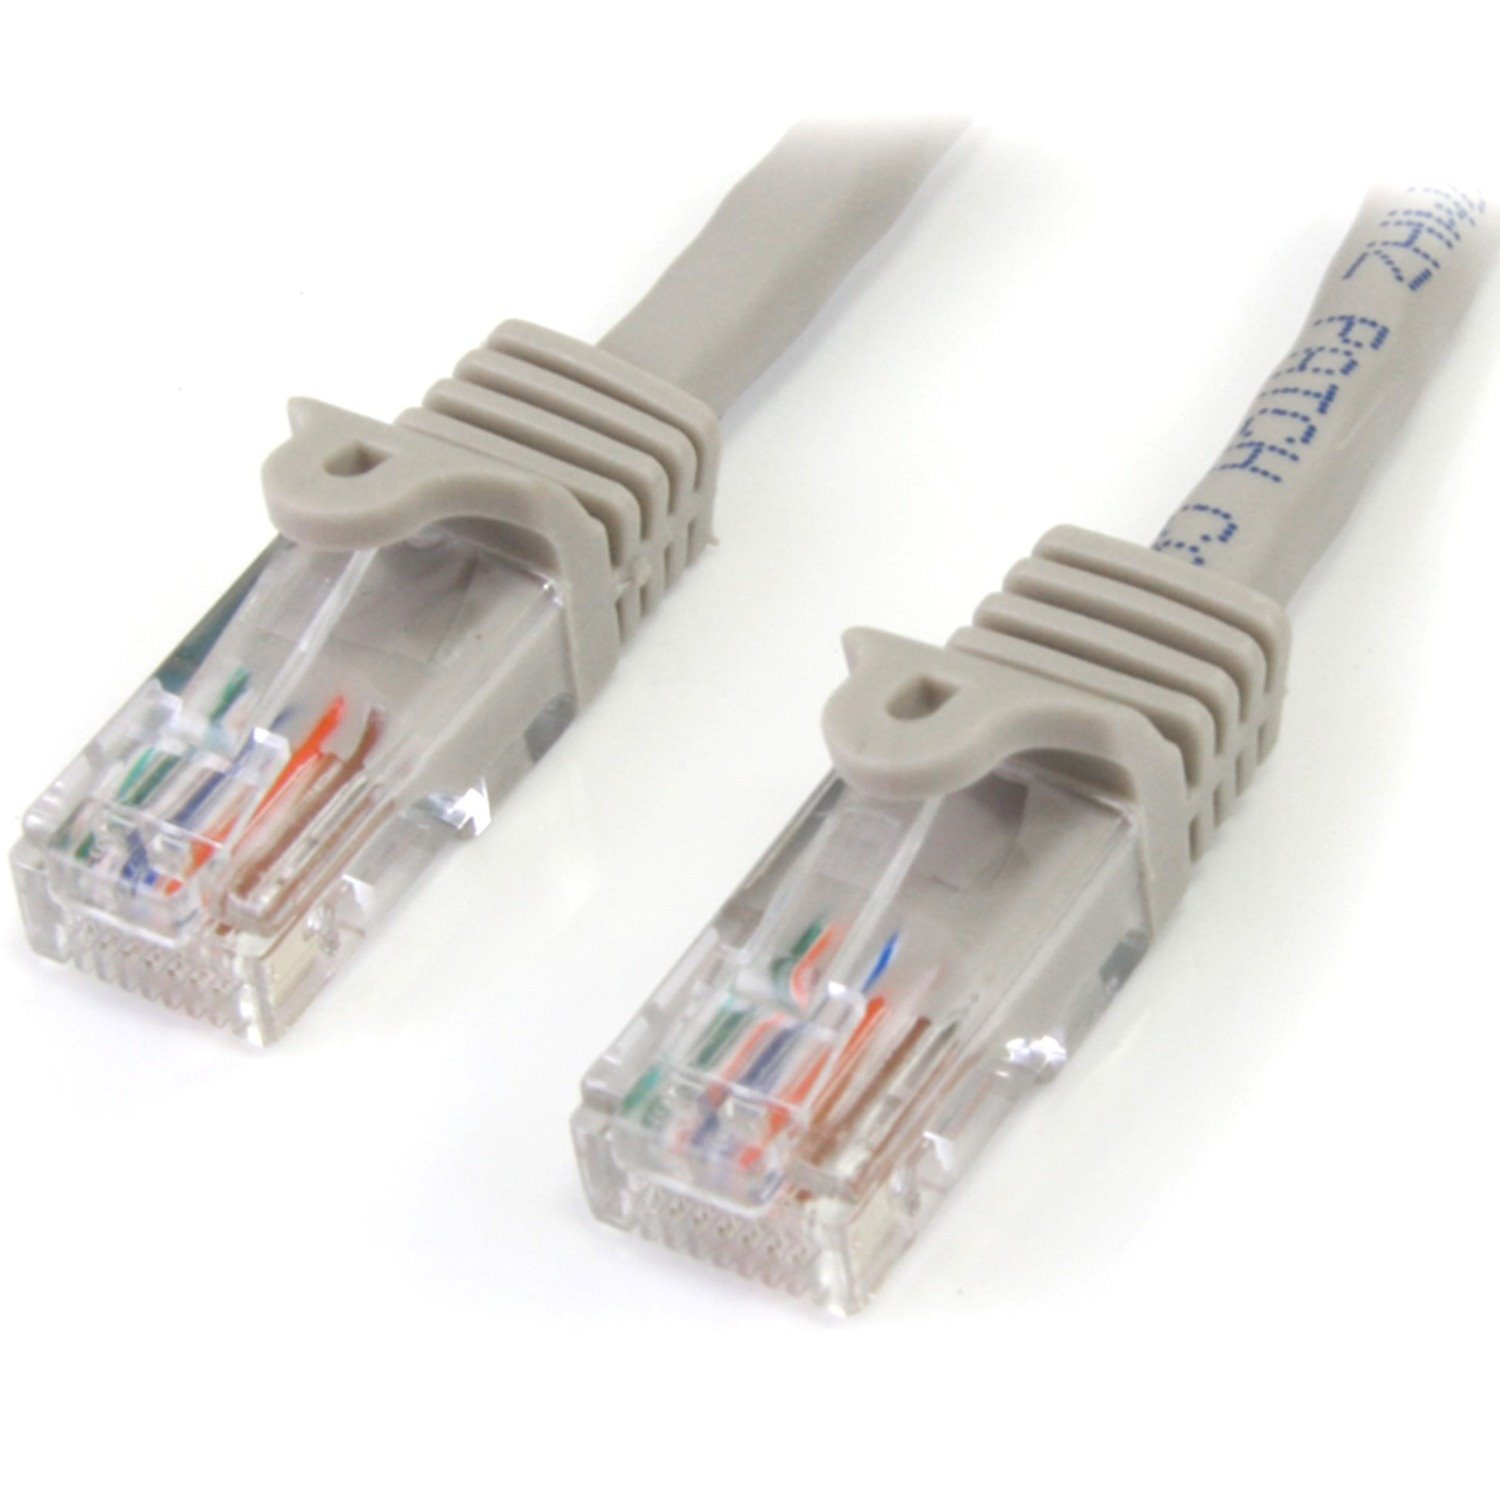 StarTech.com 2 m Gray Cat5e Snagless RJ45 UTP Patch Cable - 2m Patch Cord - Ethernet Patch Cable - RJ45 Male to Male Cat 5e Cable